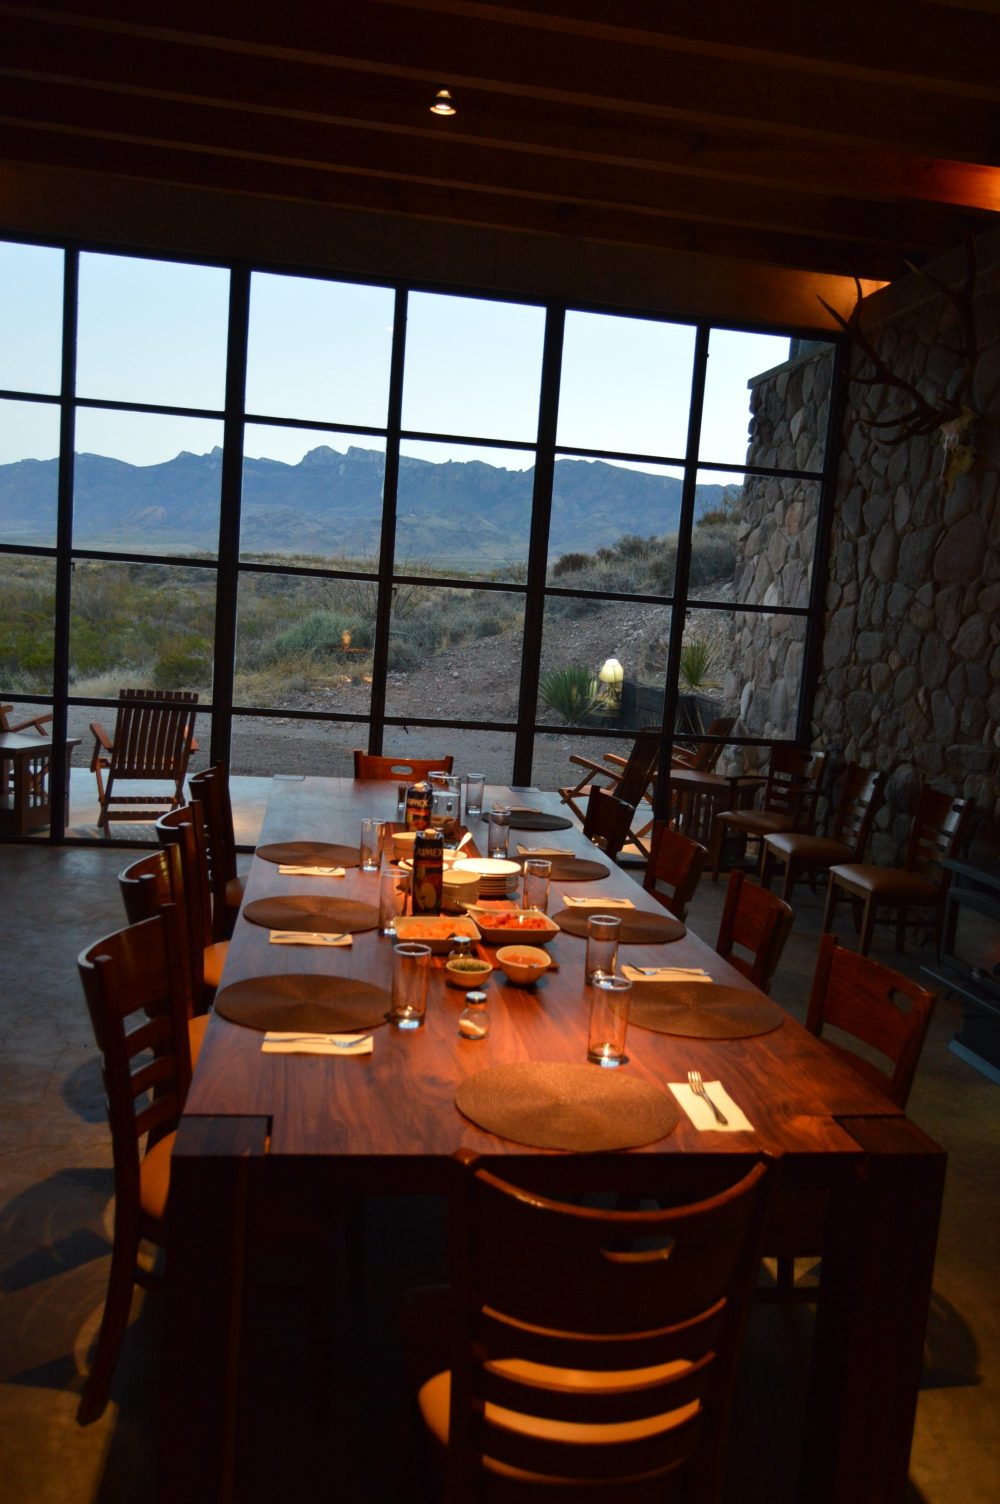 Dining area with windows overlooking mountains in La Cueva